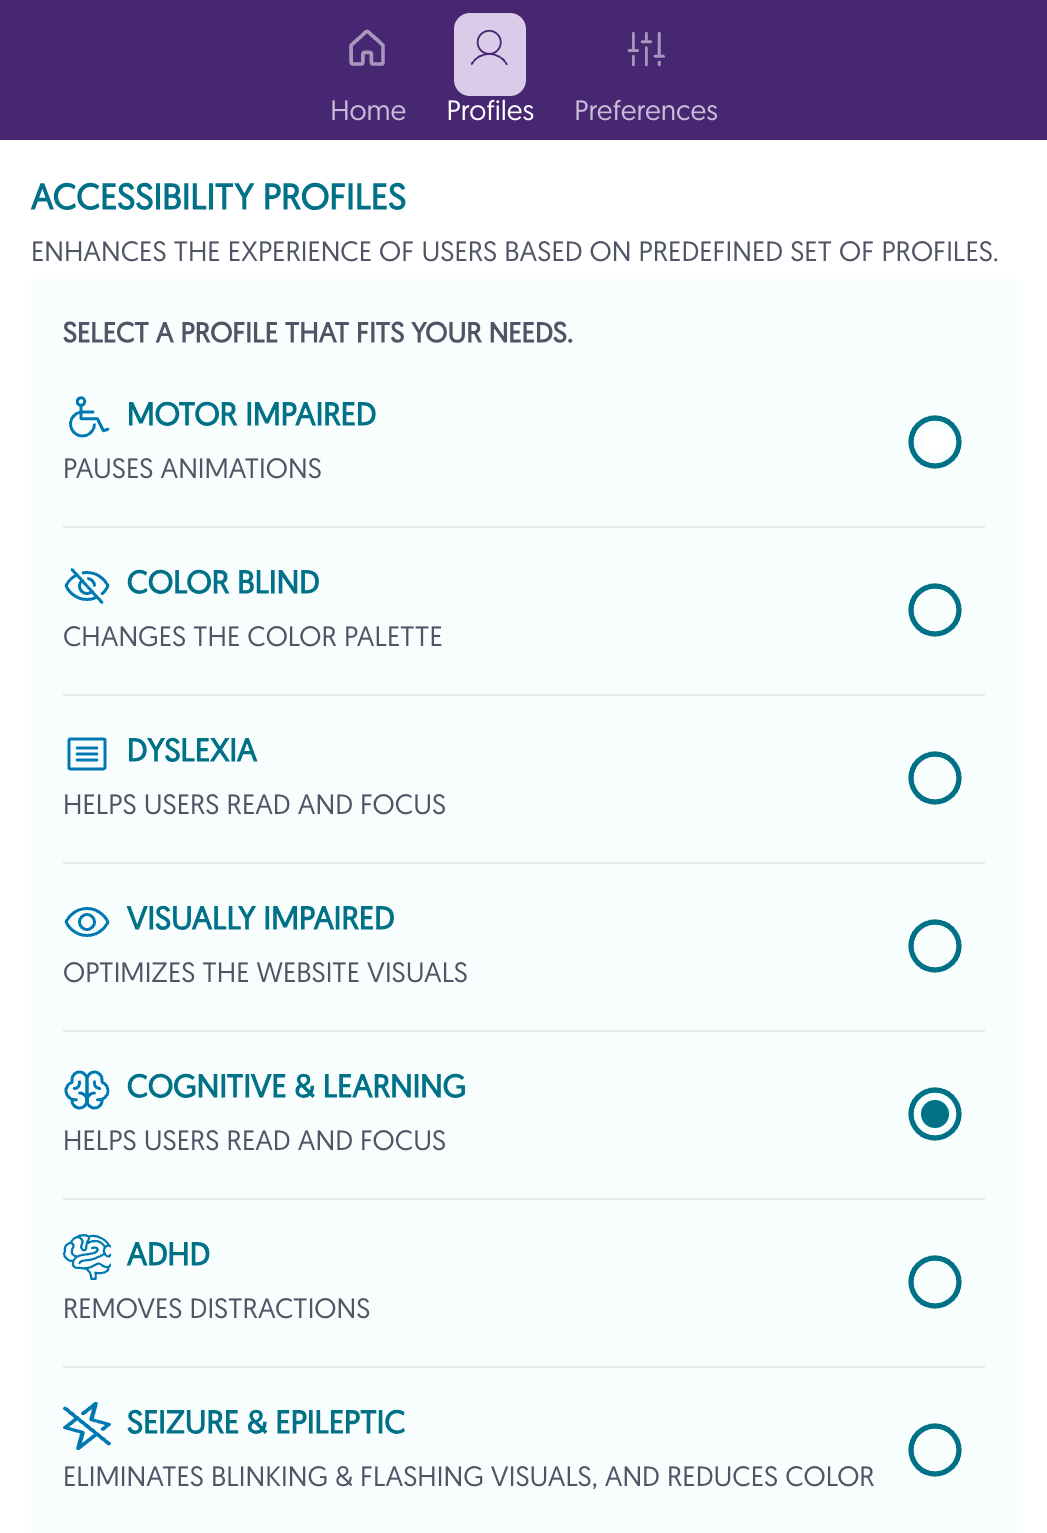 Pop-up of cognitive learning accessibility profile options.